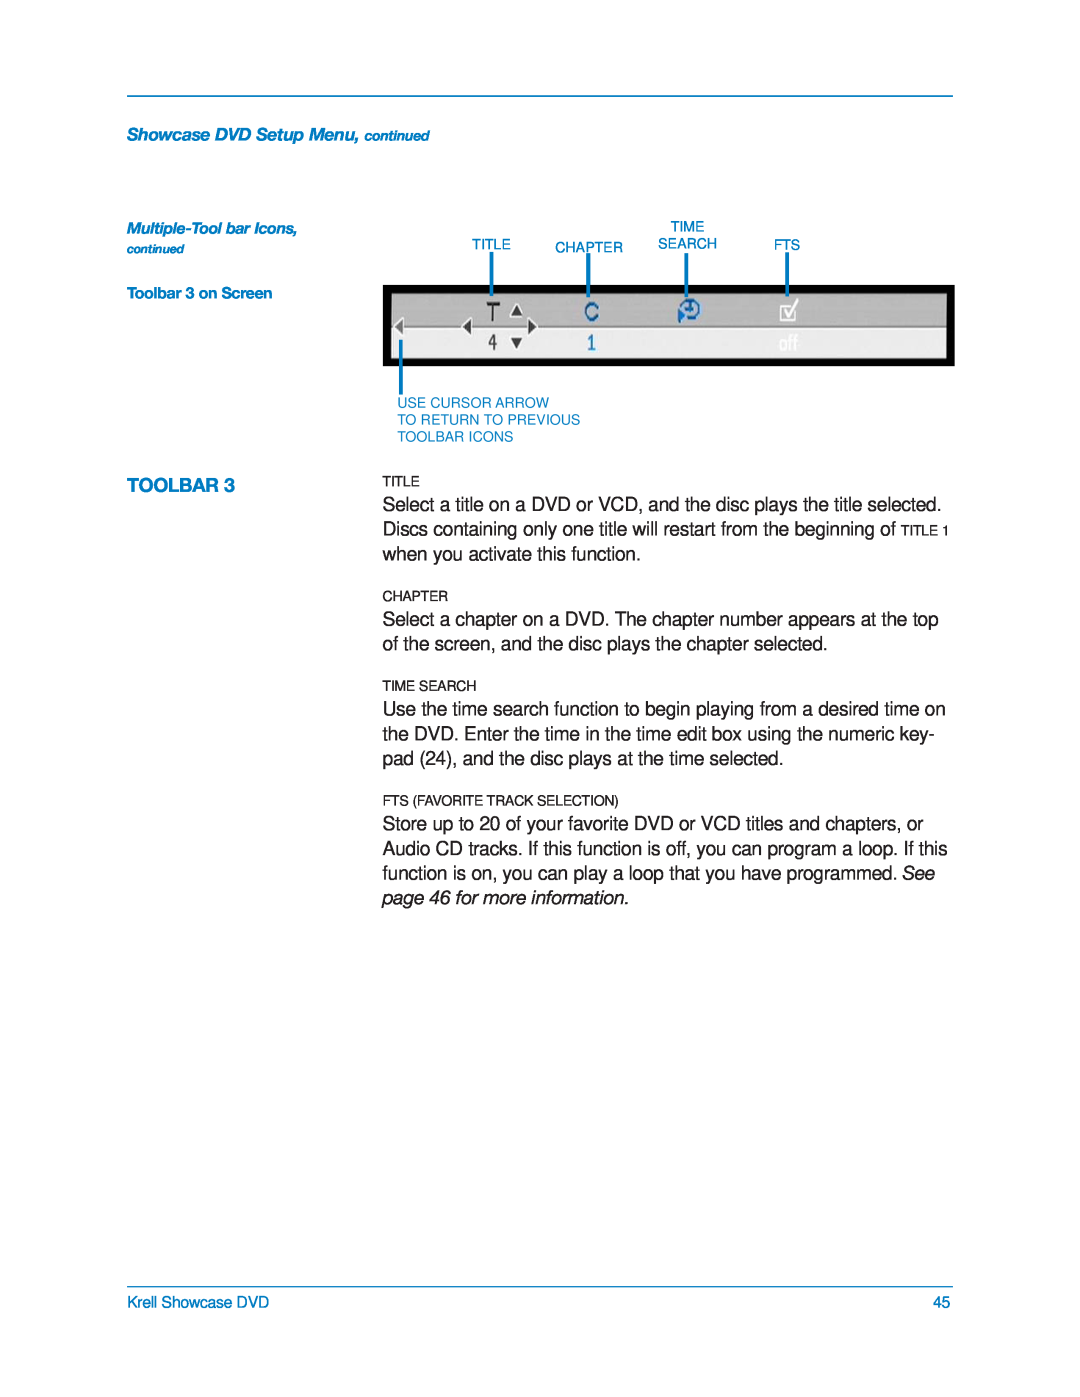 Krell Industries DVD Player manual page 46 for more information, Toolbar 3 on Screen 